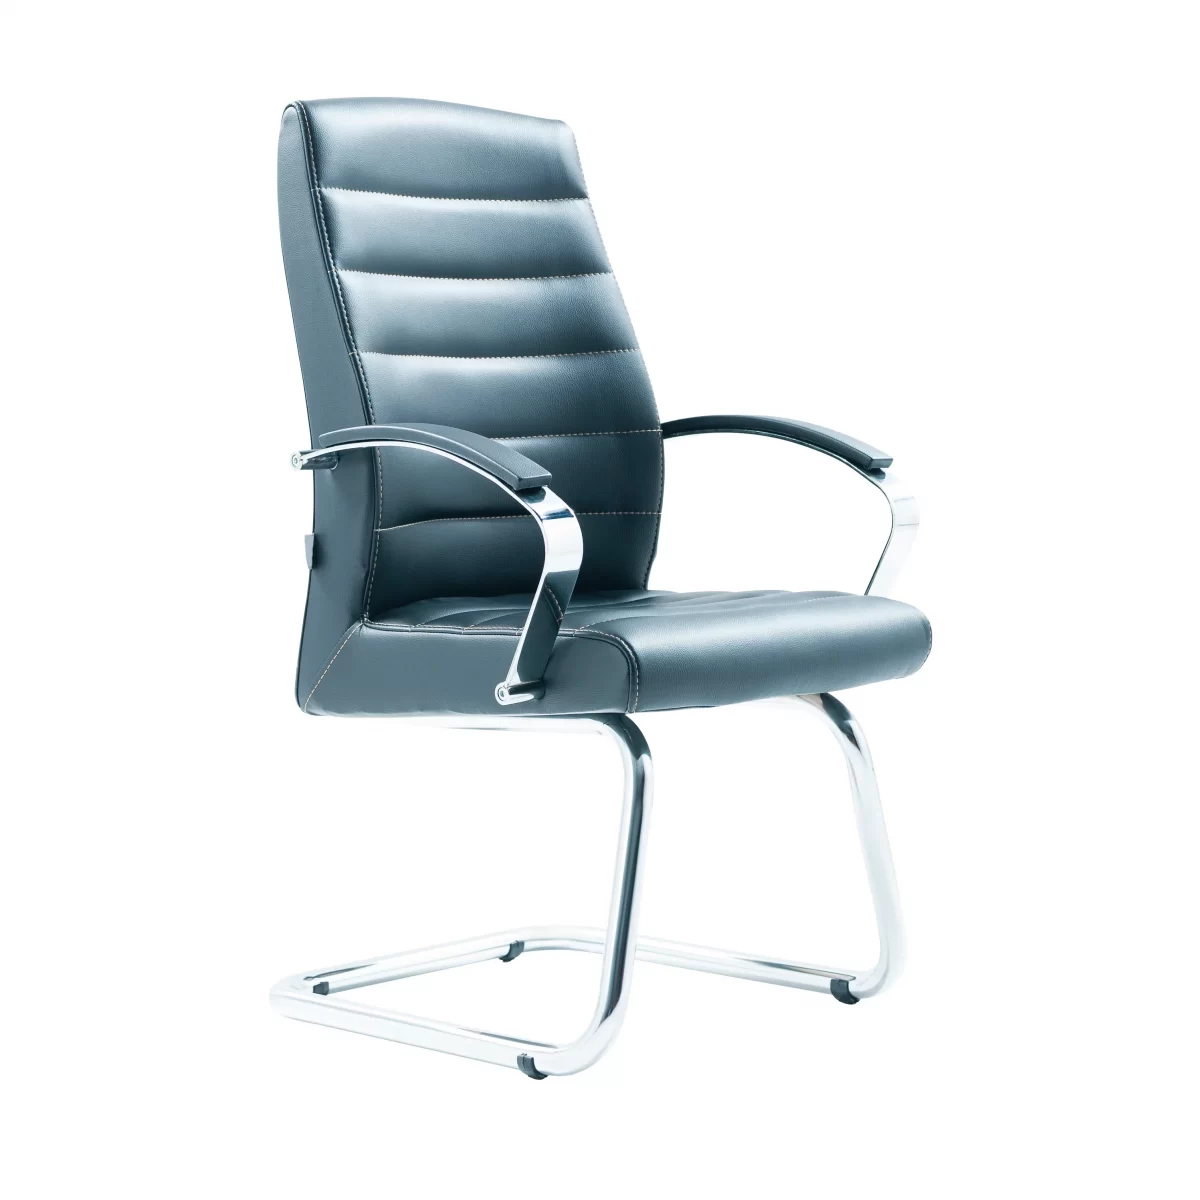 Akron Office Waiting Chair Modern Office Chairs Turkey 2 scaled